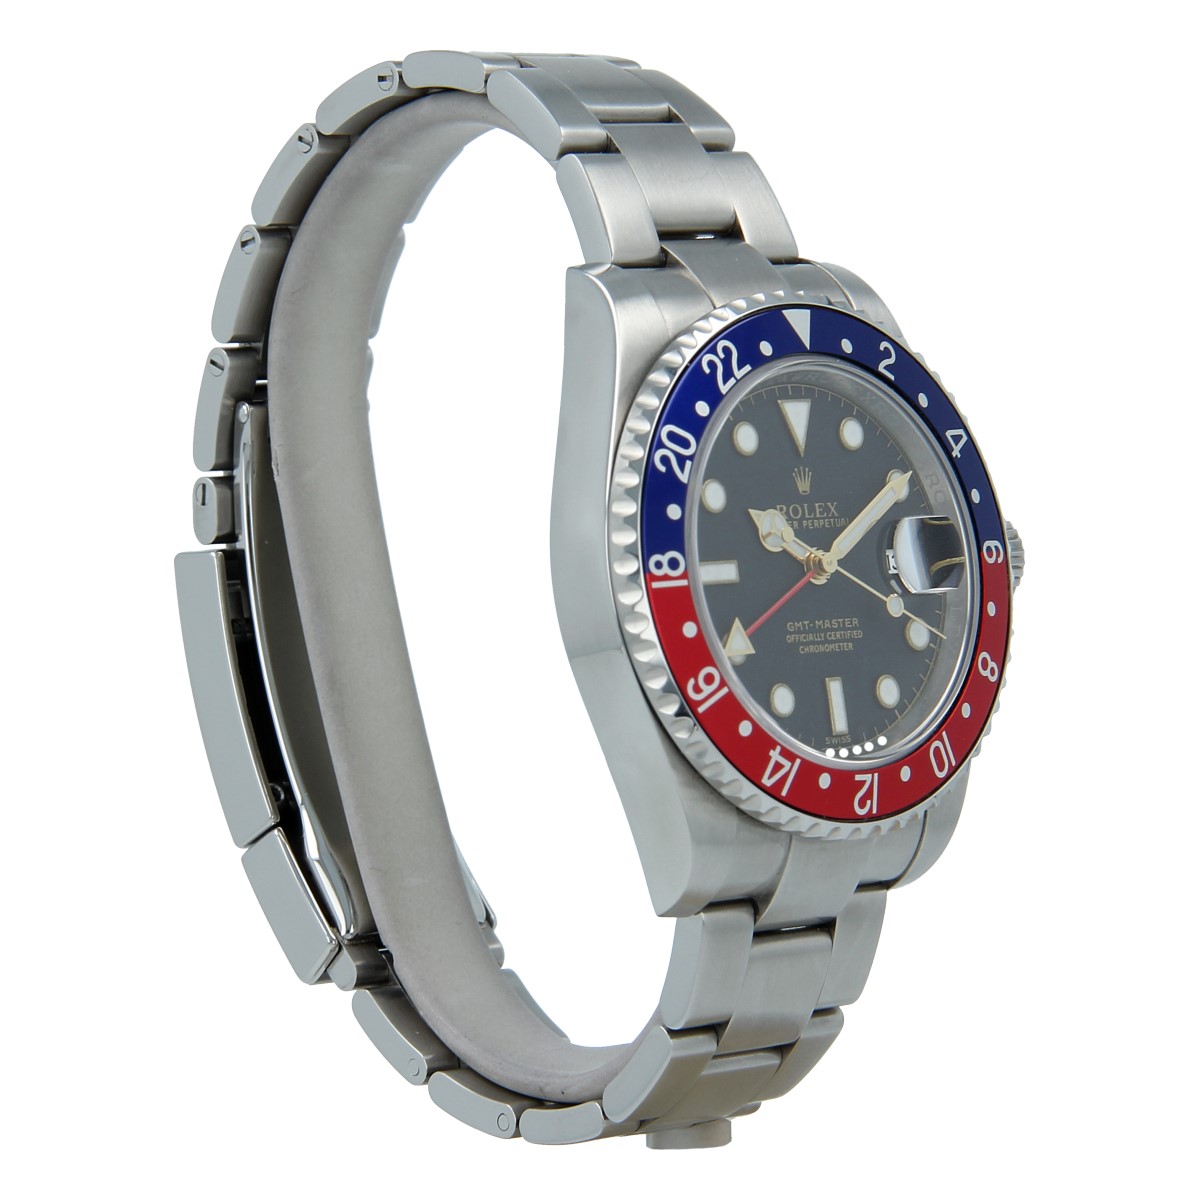 Rolex PAN AM GMT-Master II Limited by Blaken | pre-owned Rolex